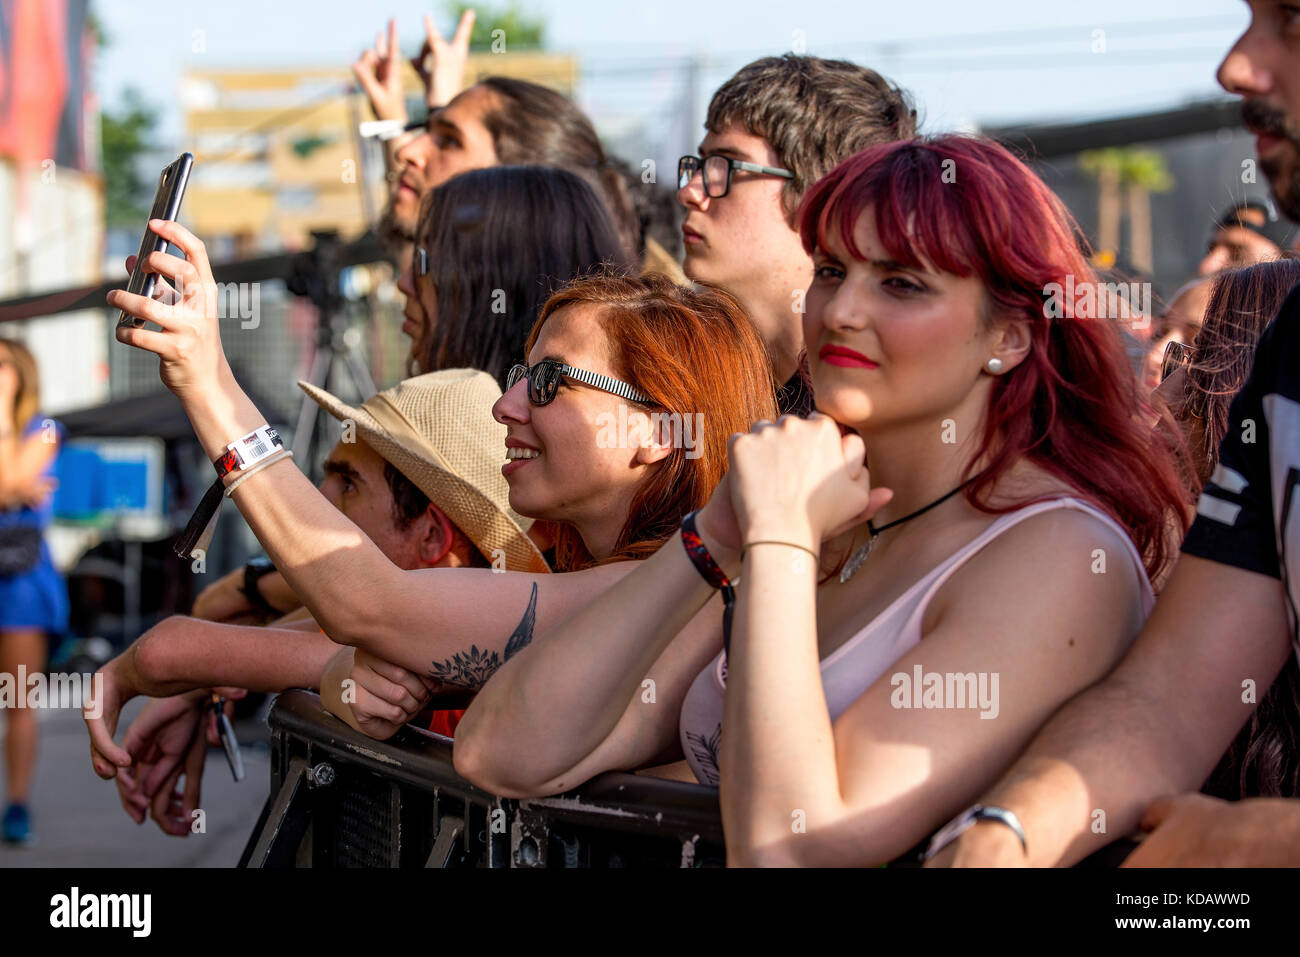 Madrid Jun 22 Linkin Park Music Band Perform In Concert At Download Heavy Metal Music Festival On June 22 16 In Madrid Spain Stock Photo Alamy